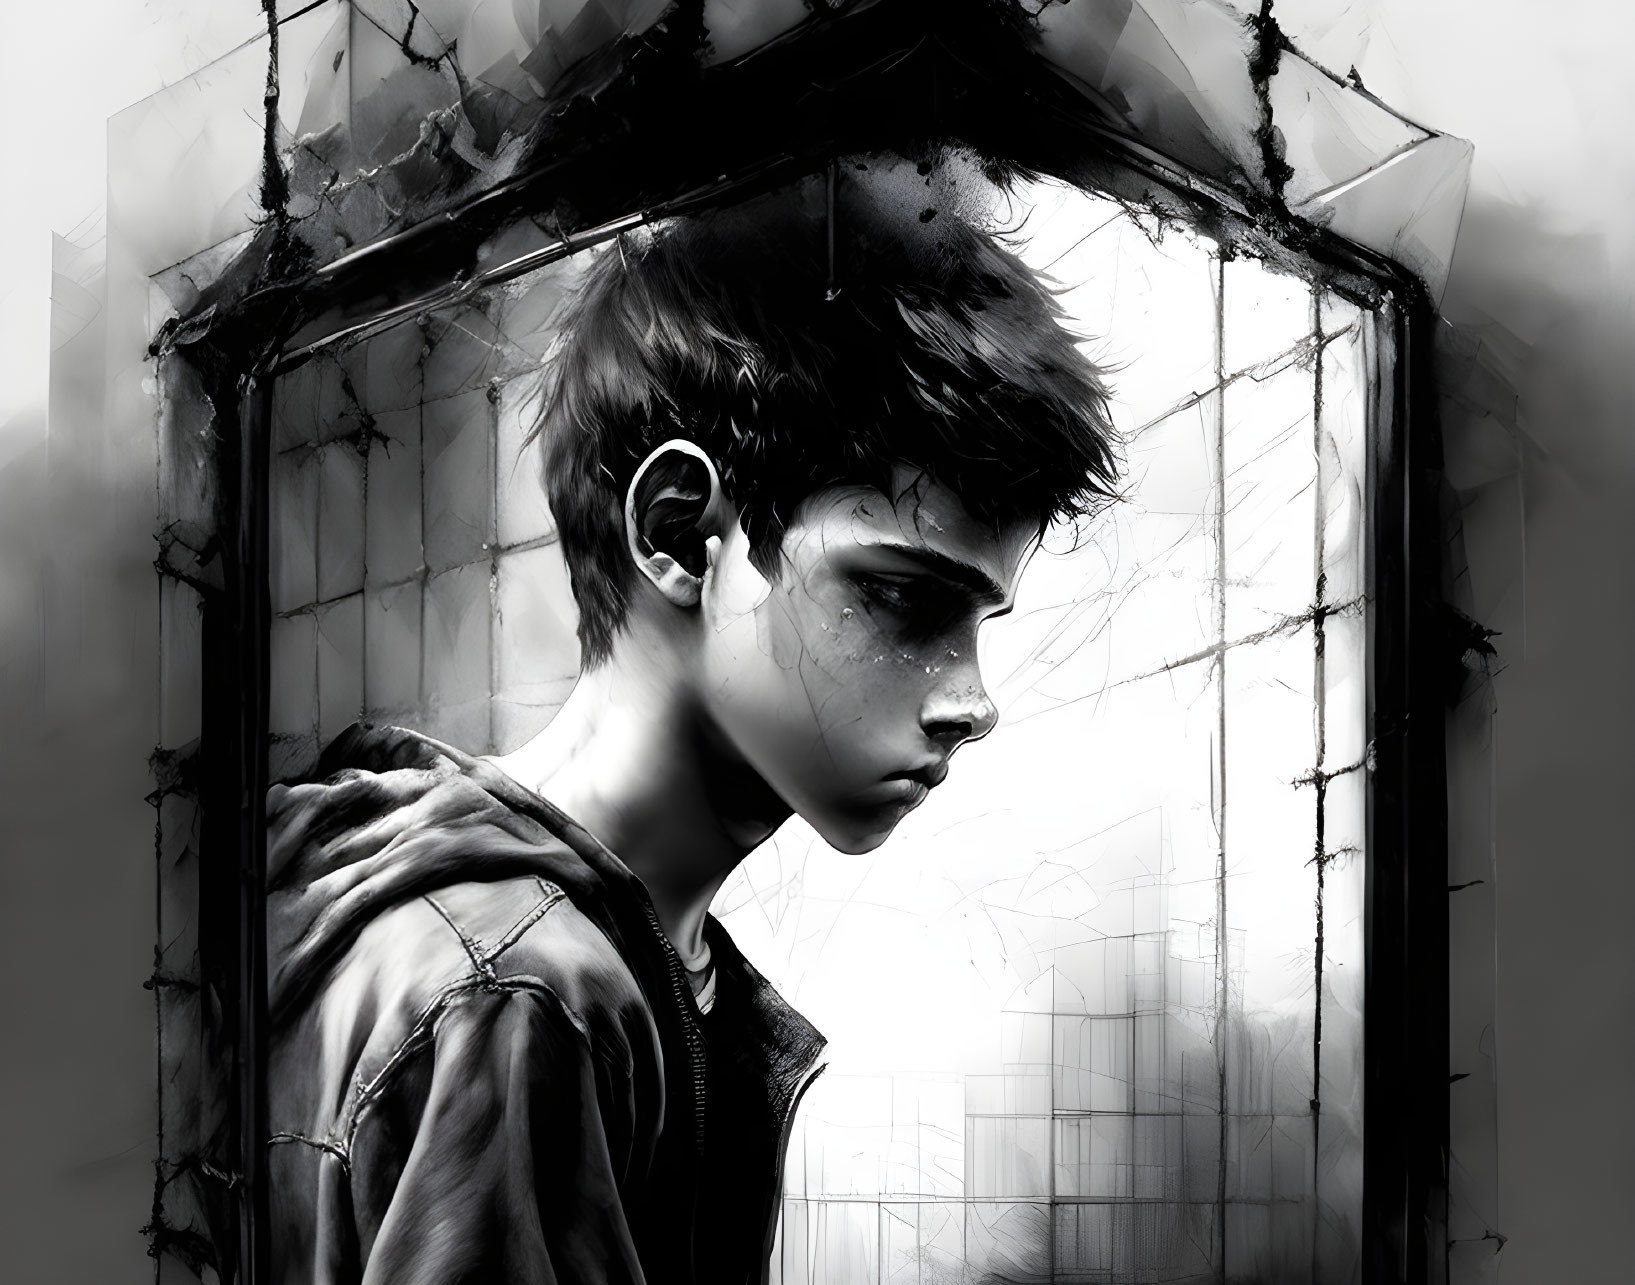 Monochrome artwork of pensive youth by window with barbed wire